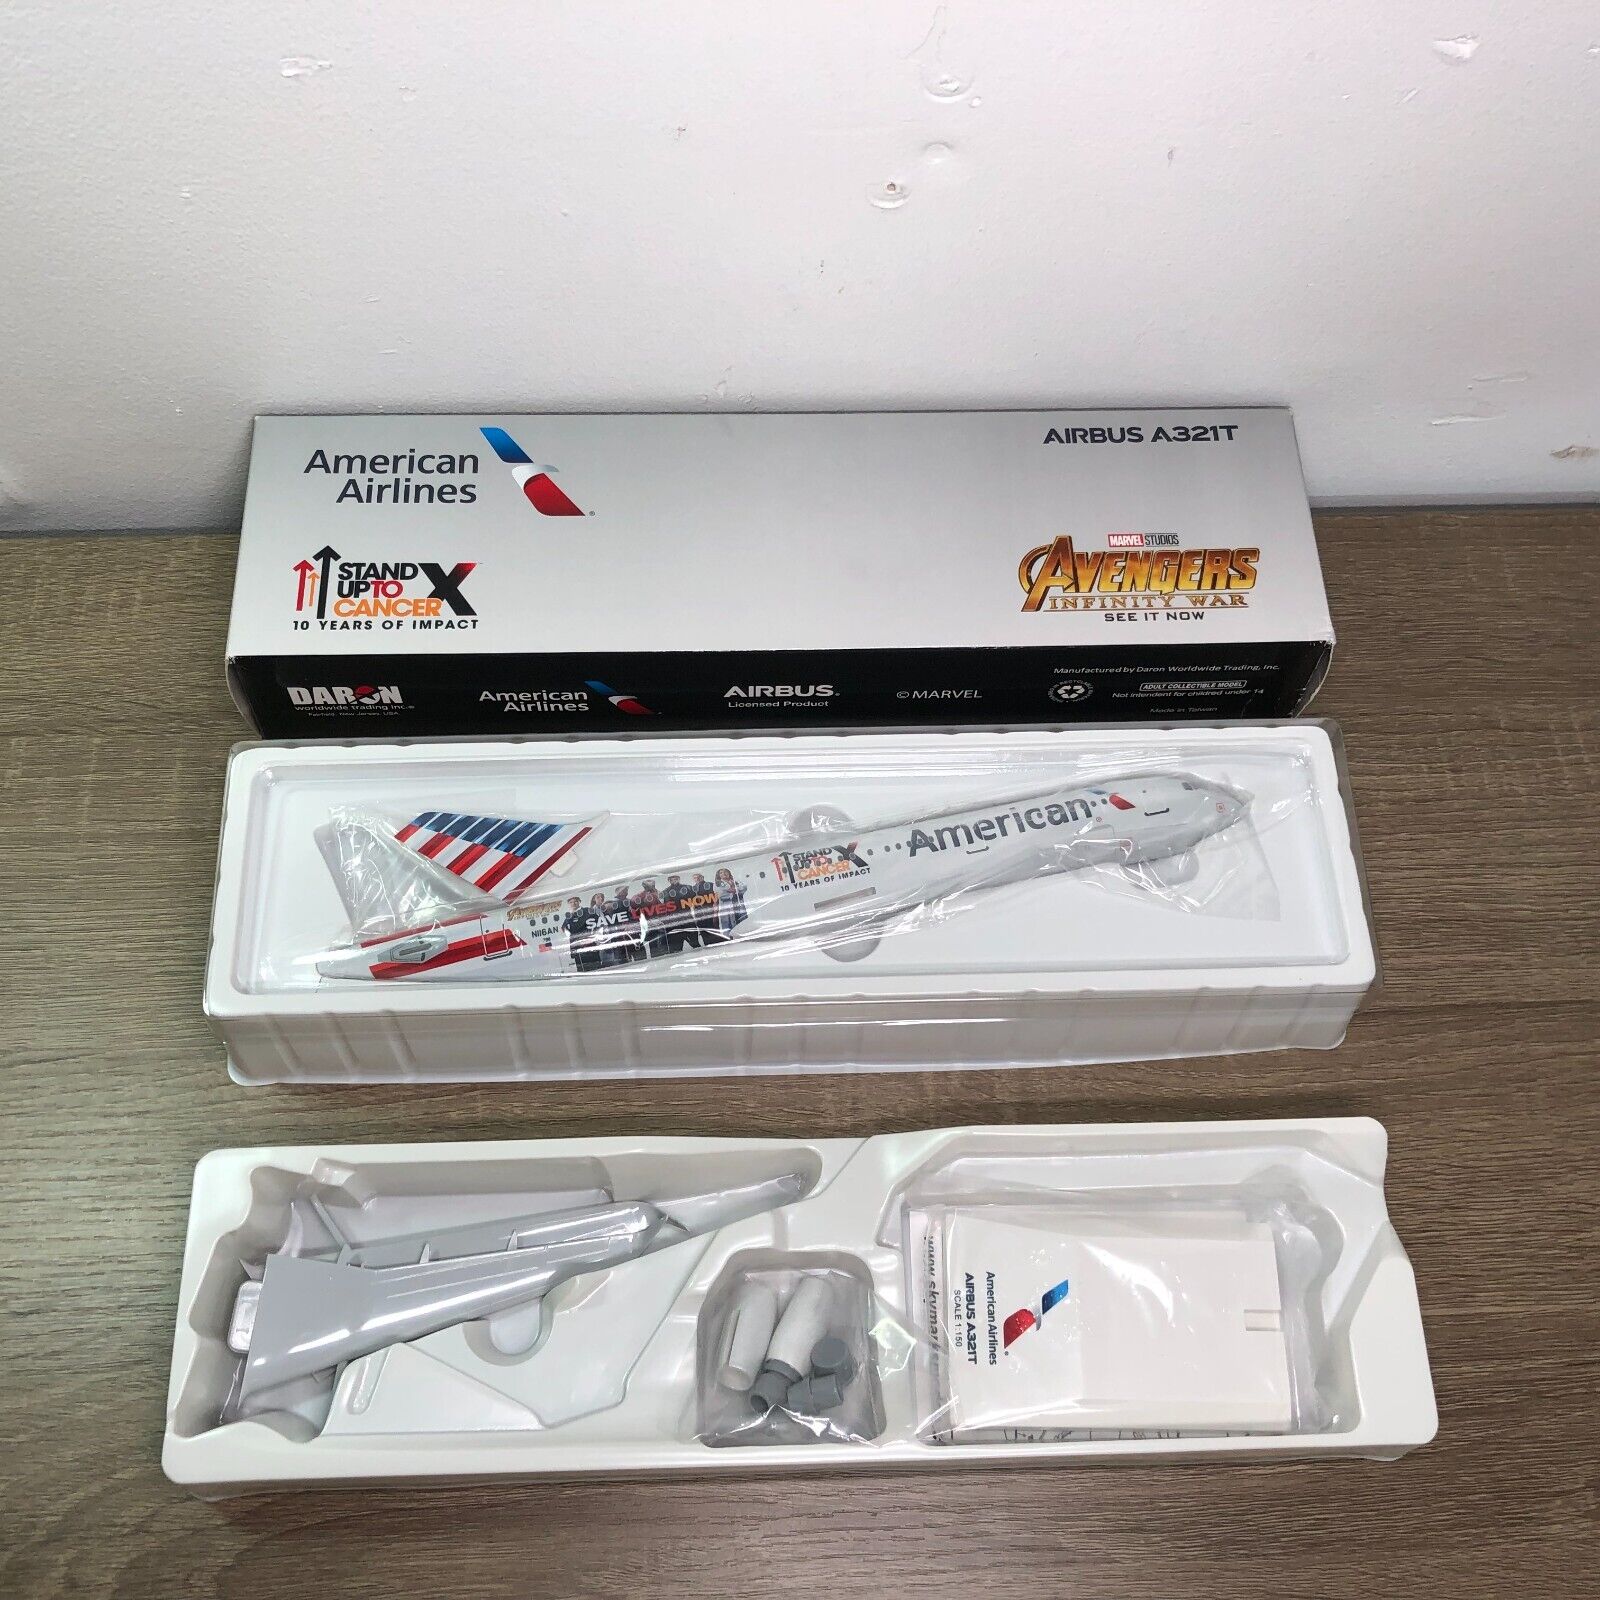 Airplane Model Kit American Airlines AirBus A321T Marvel Avengers Infinity Wars